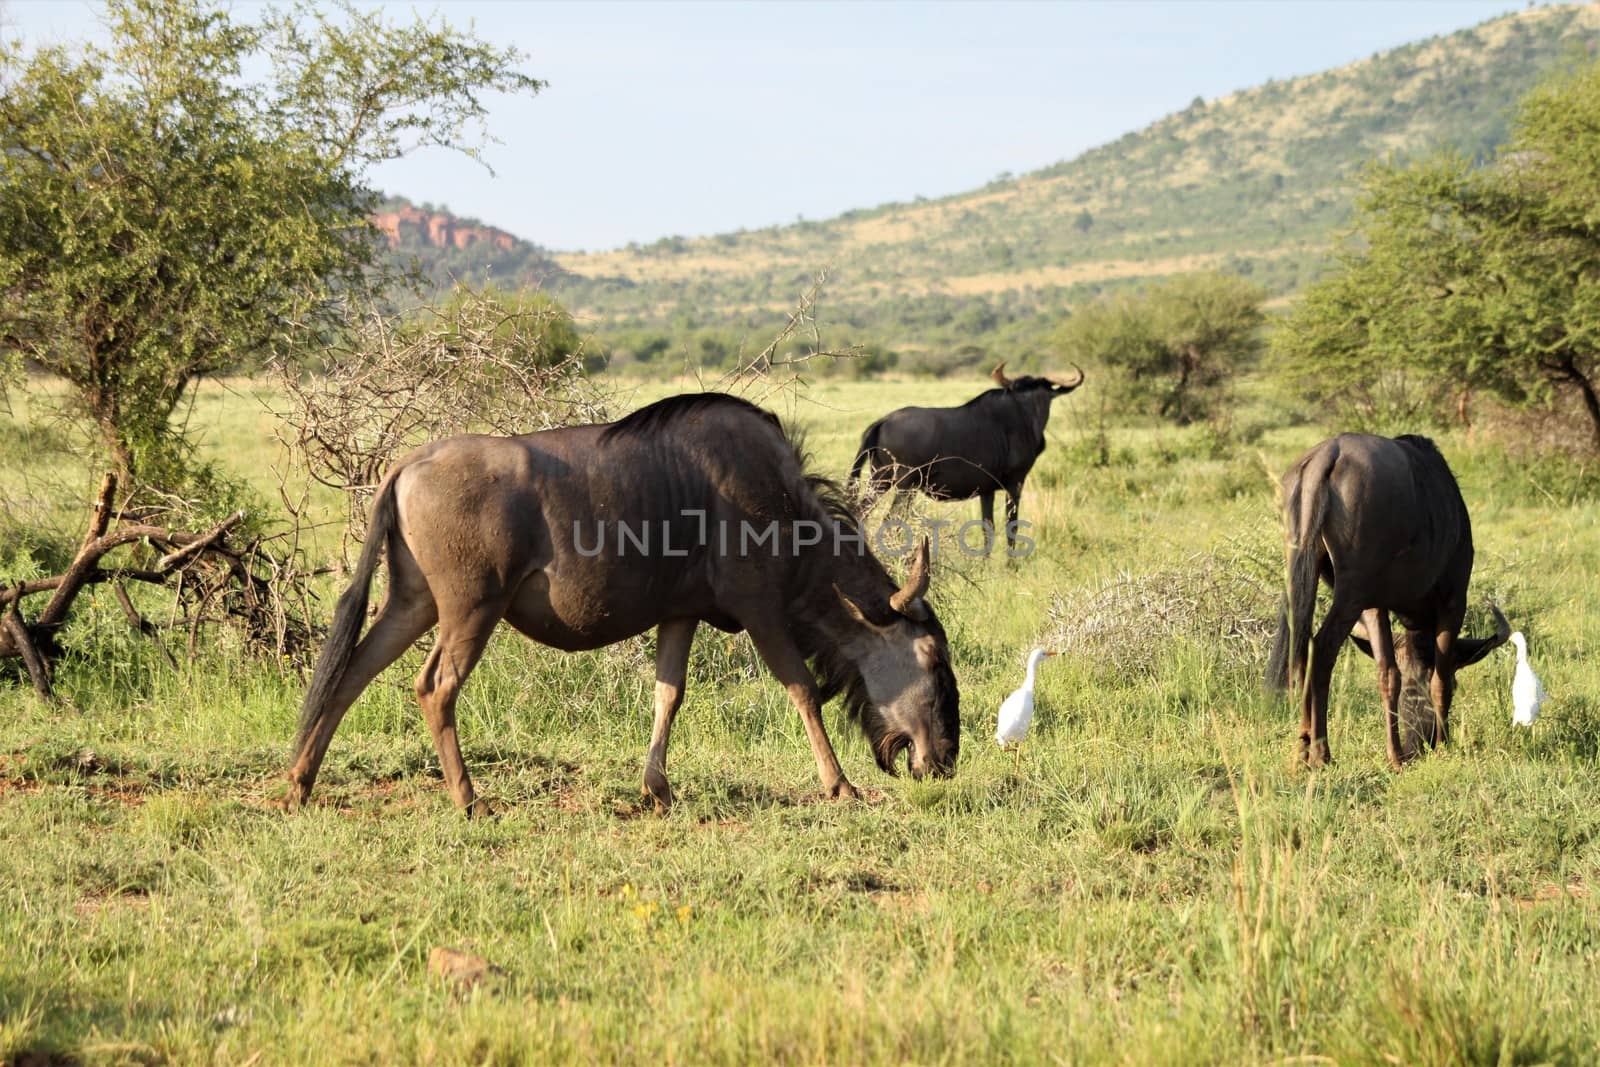 Some wildebeests and white birds in the savannah by Luise123